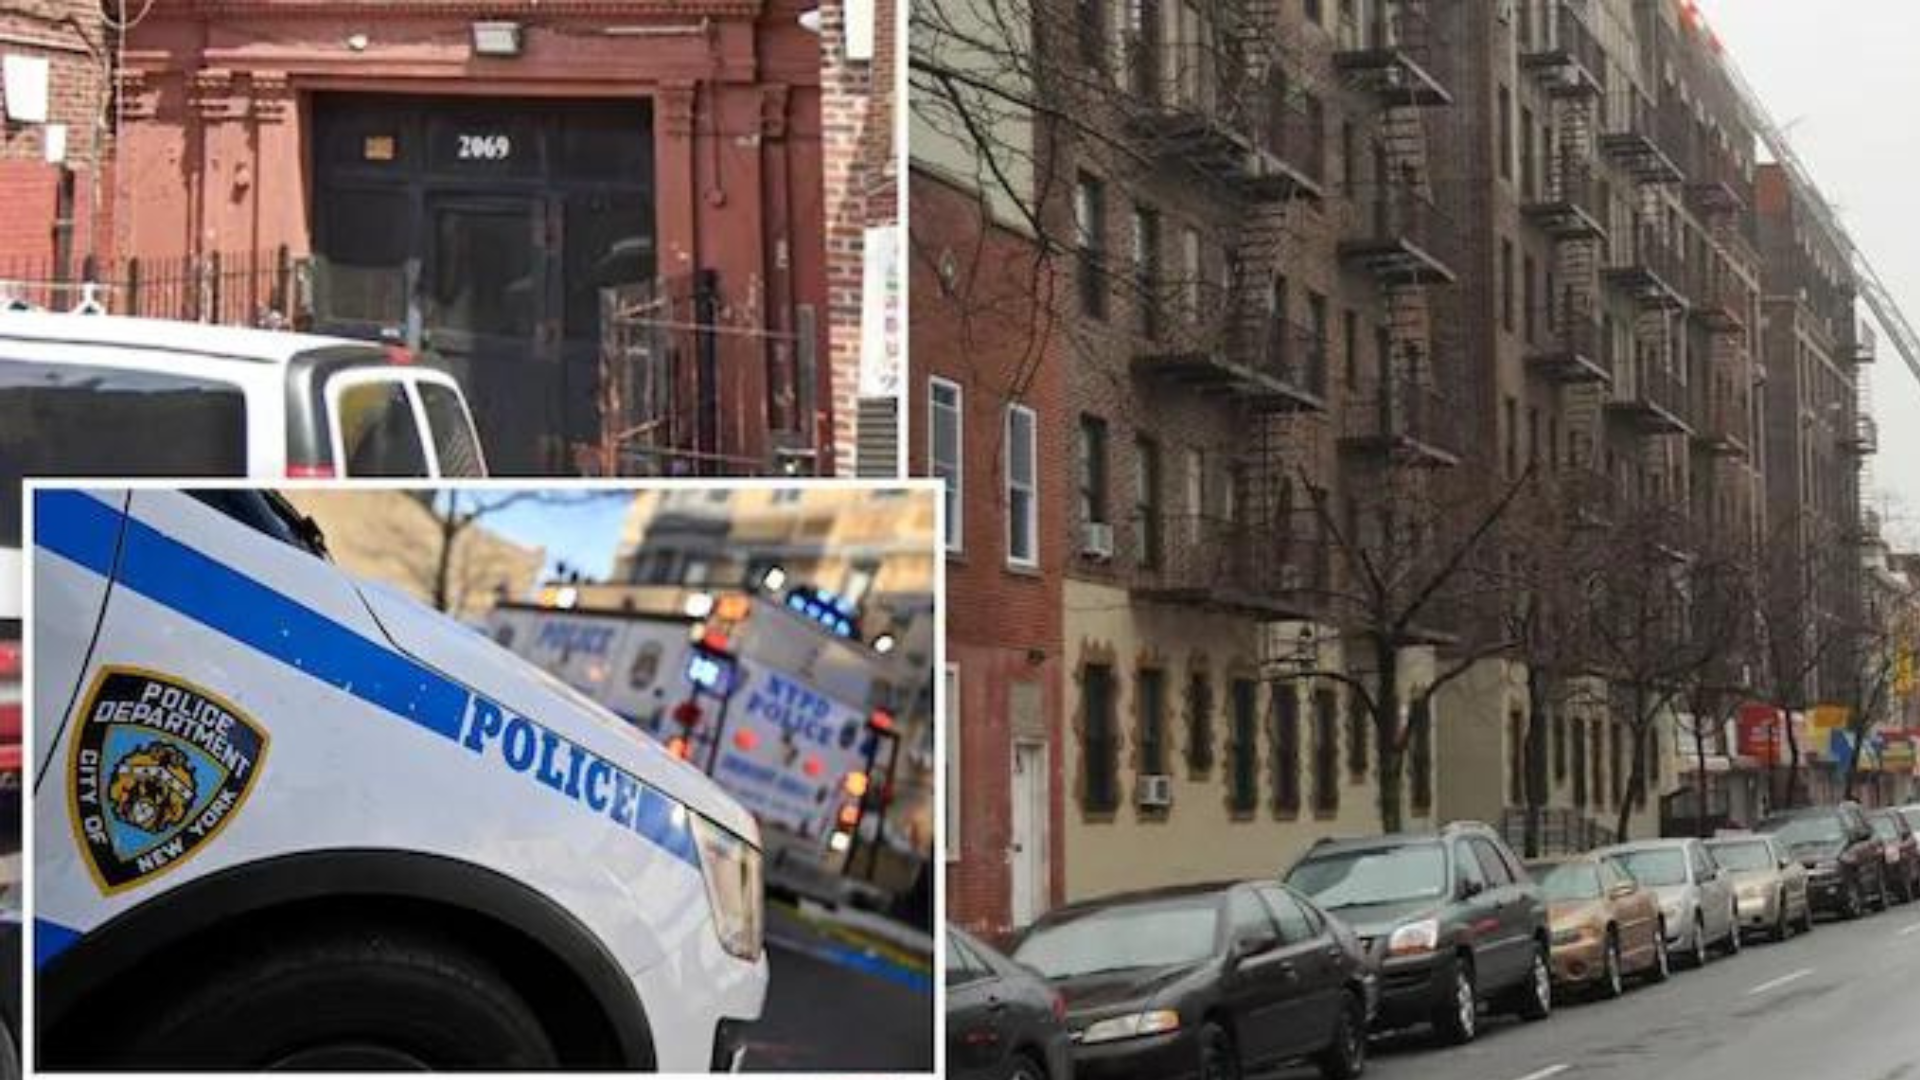 A Woman Is Detained After the Body Parts of a Man Are Found Stuffed in a Freezer in a New York Apartment - Post Image